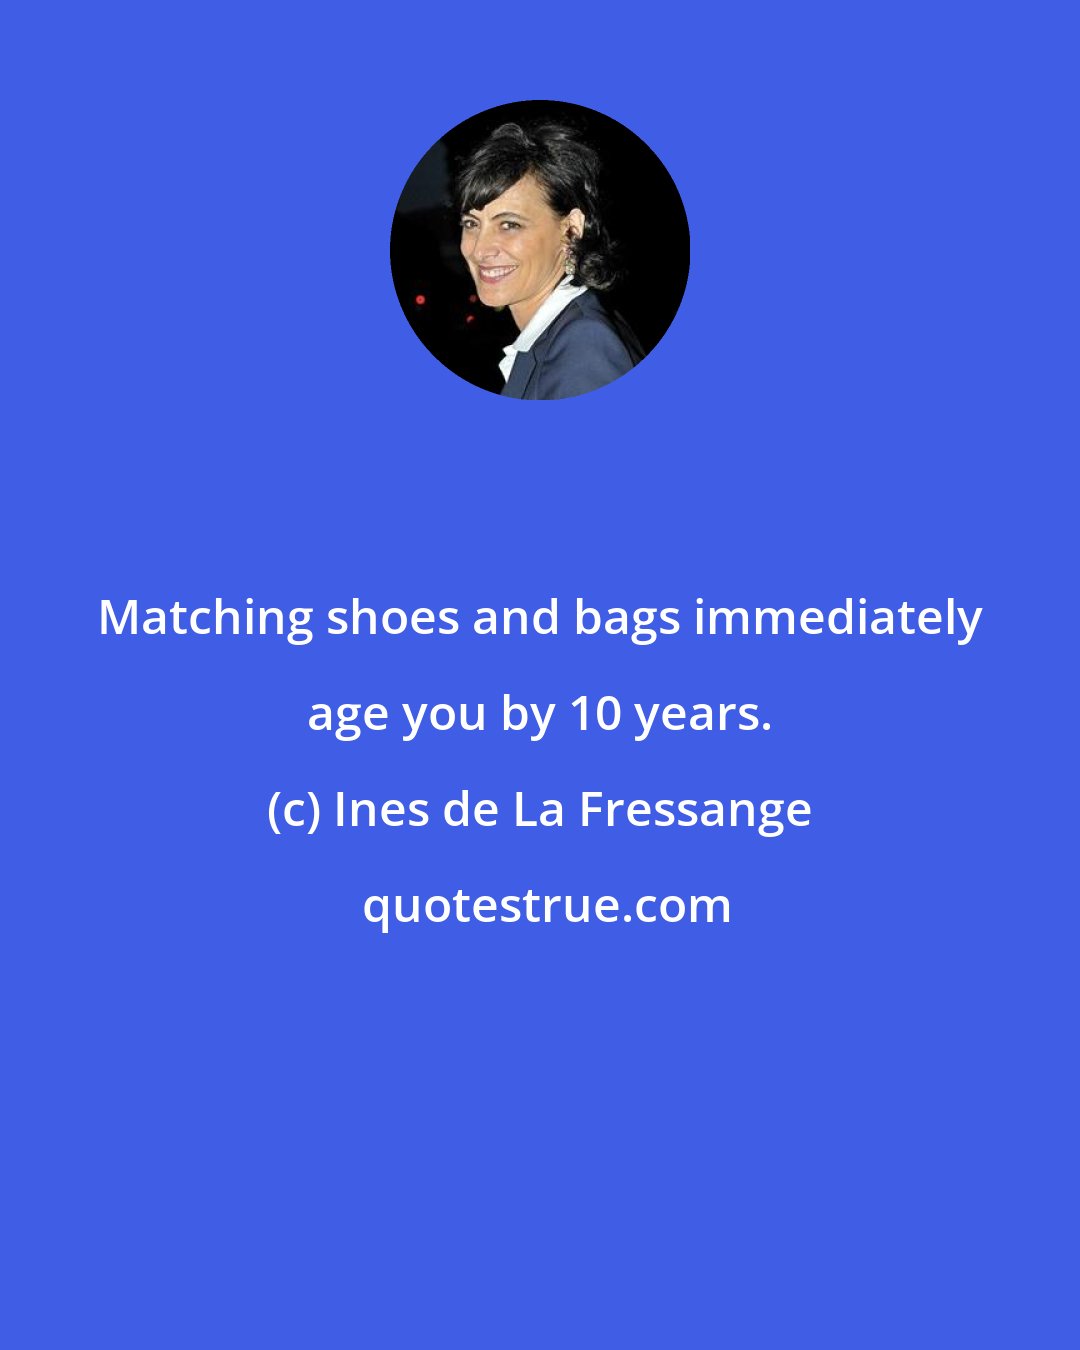 Ines de La Fressange: Matching shoes and bags immediately age you by 10 years.